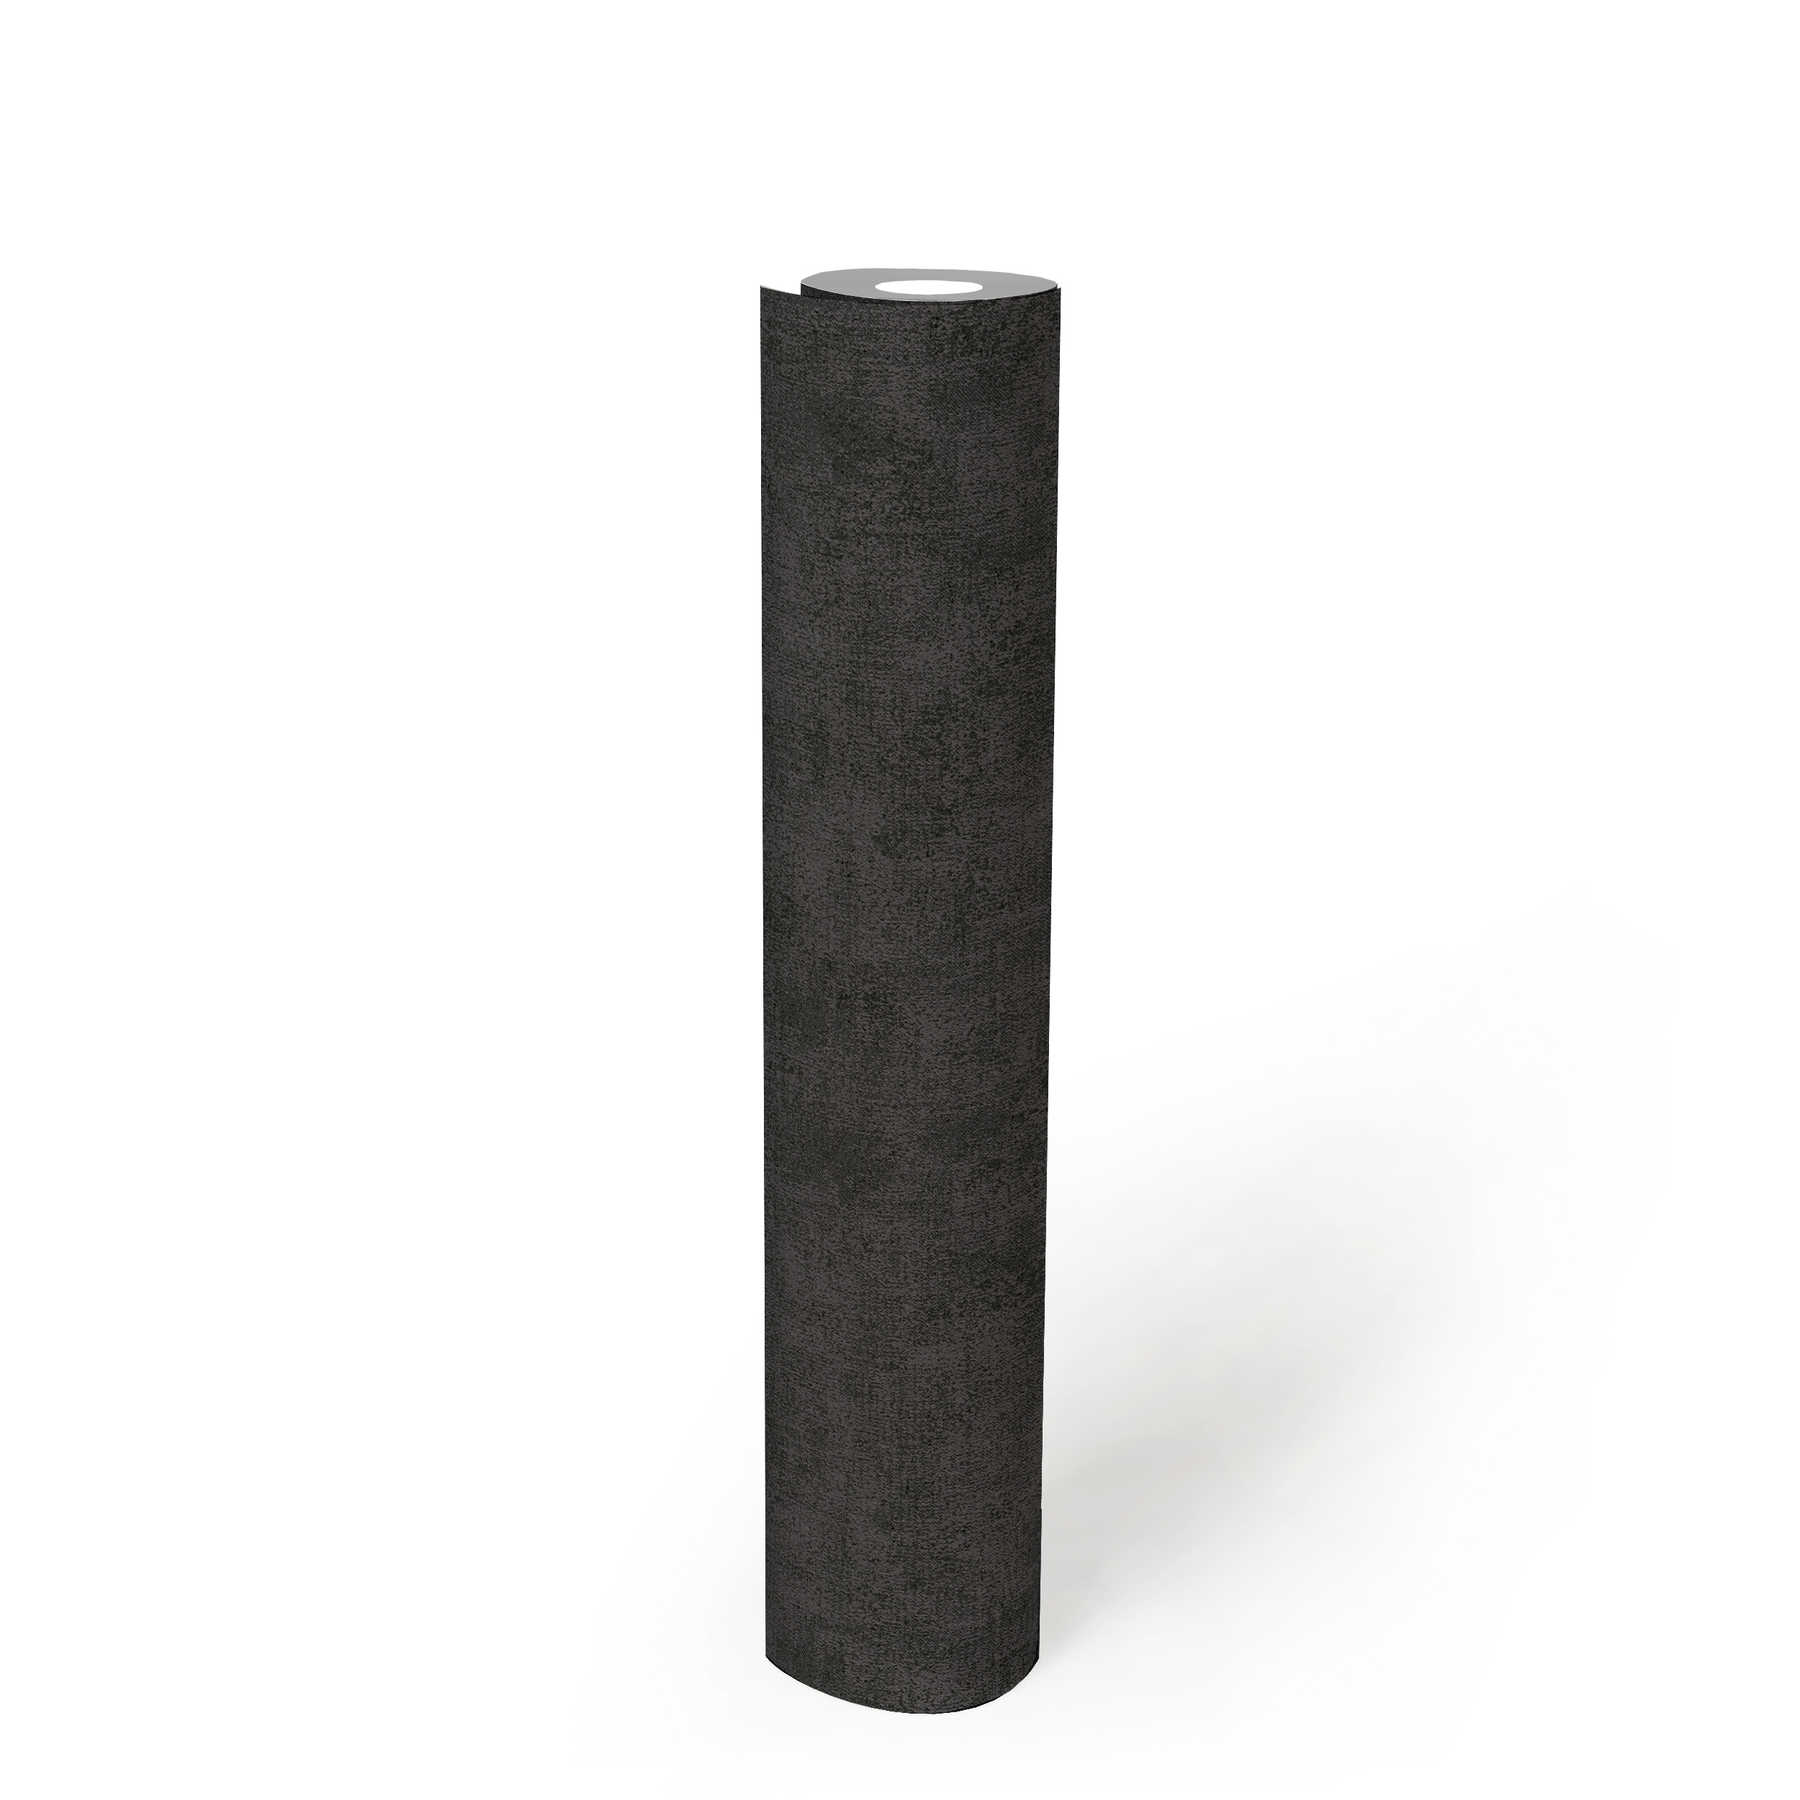             Plain wallpaper with mottled structure look - black
        